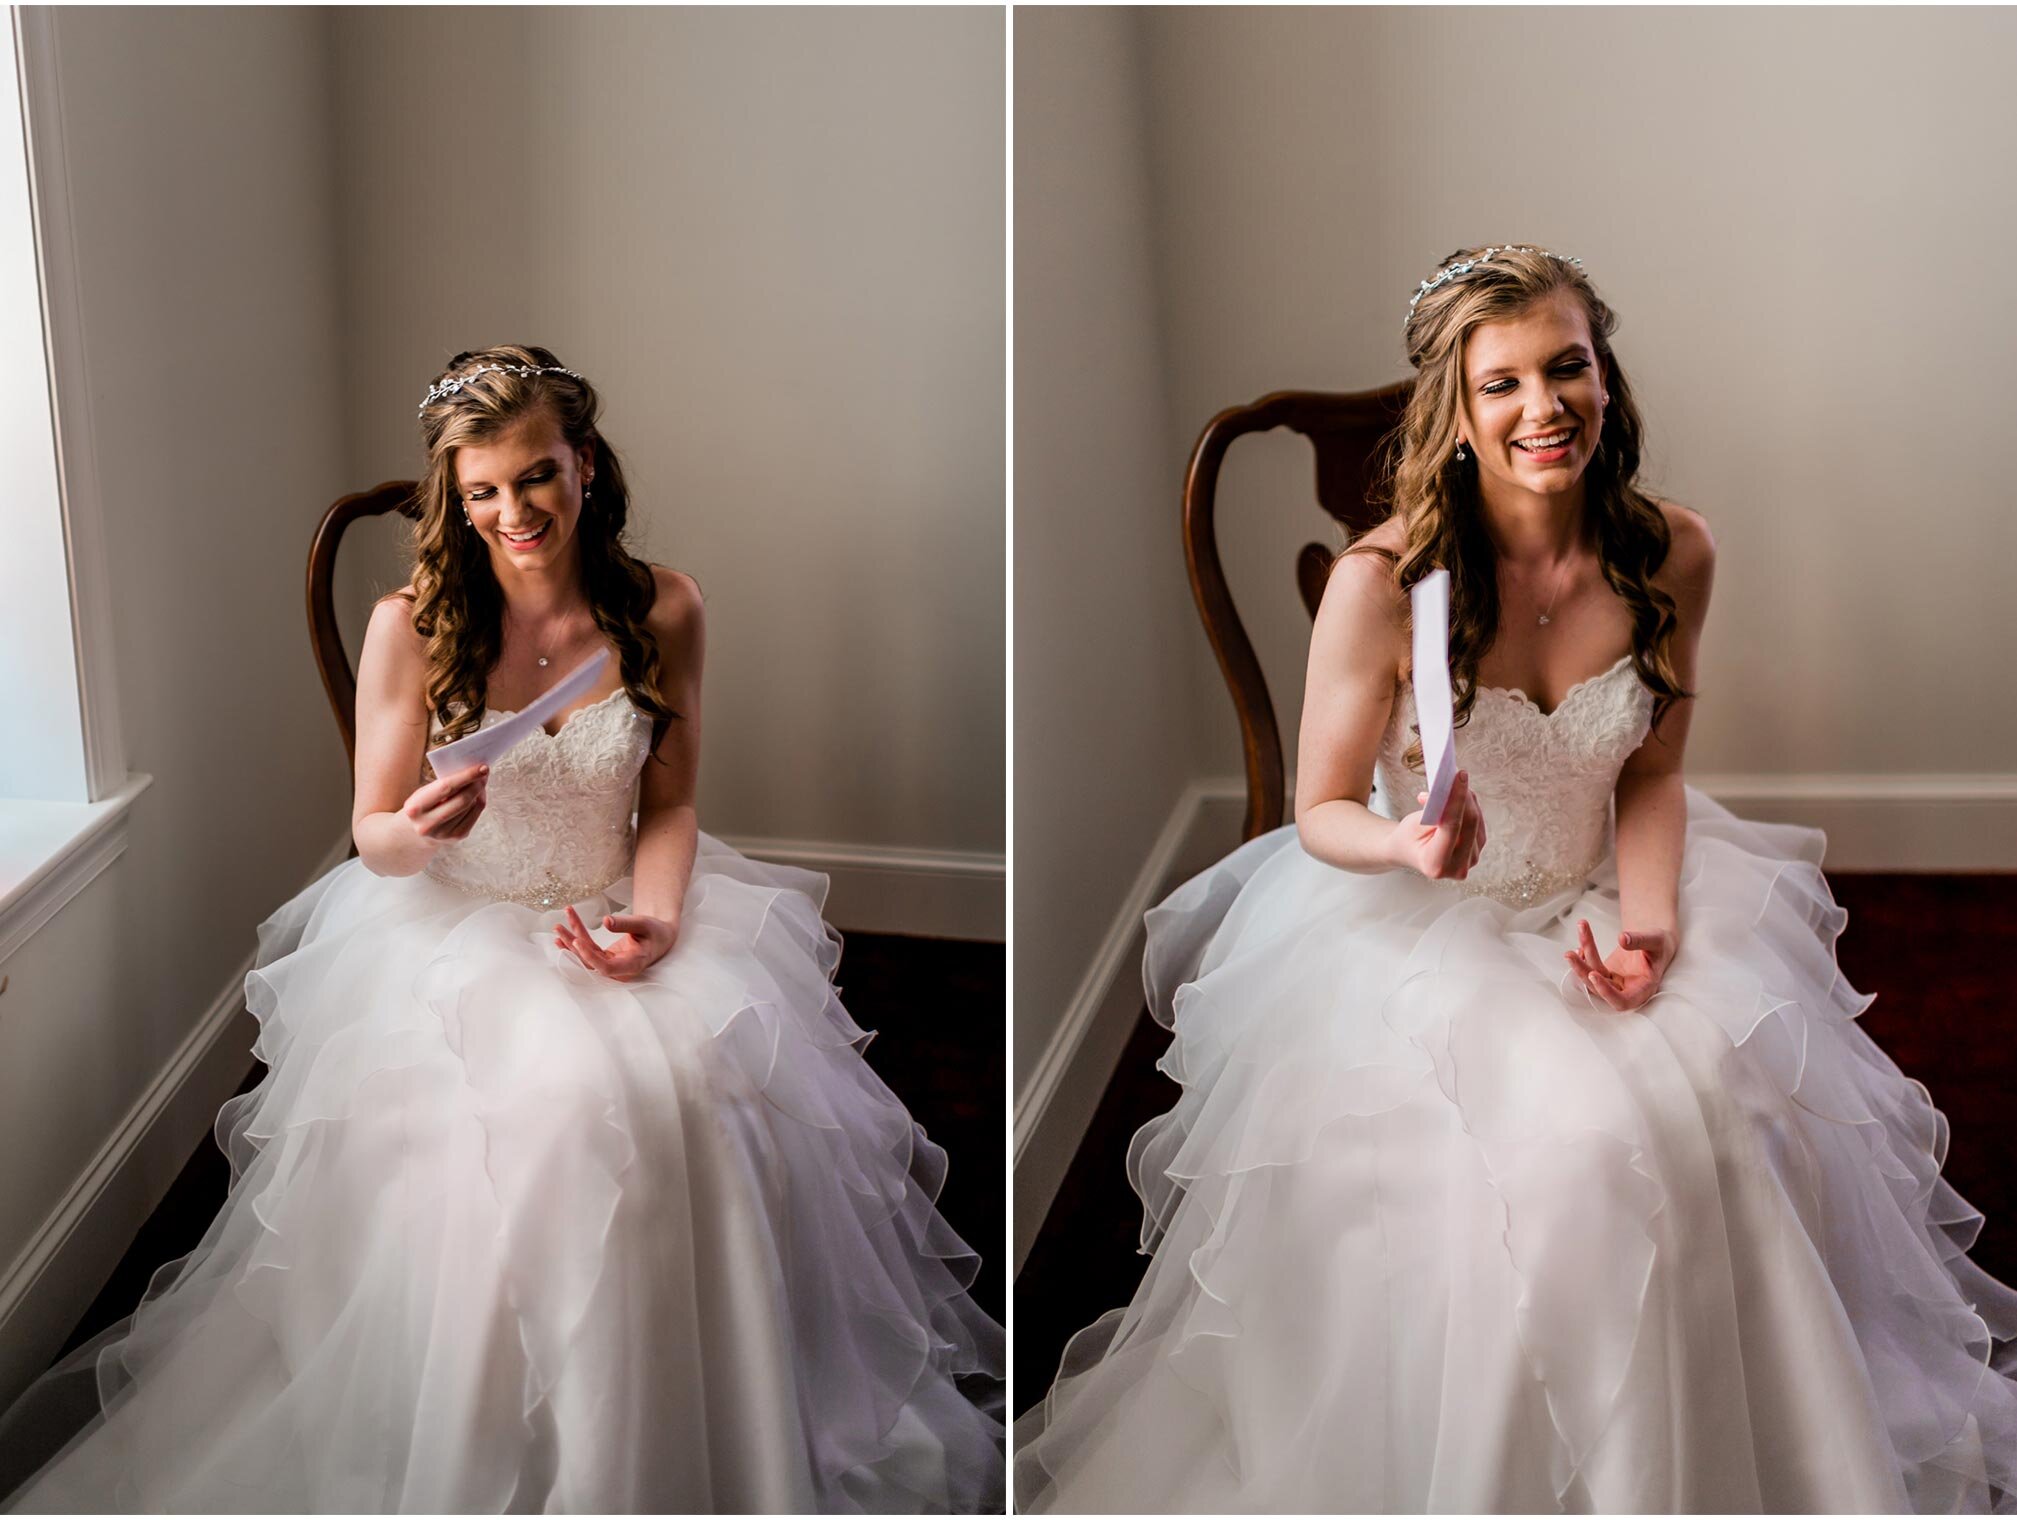 Durham Wedding Photographer | By G. Lin Photography | Bride laughing and holding letter from groom